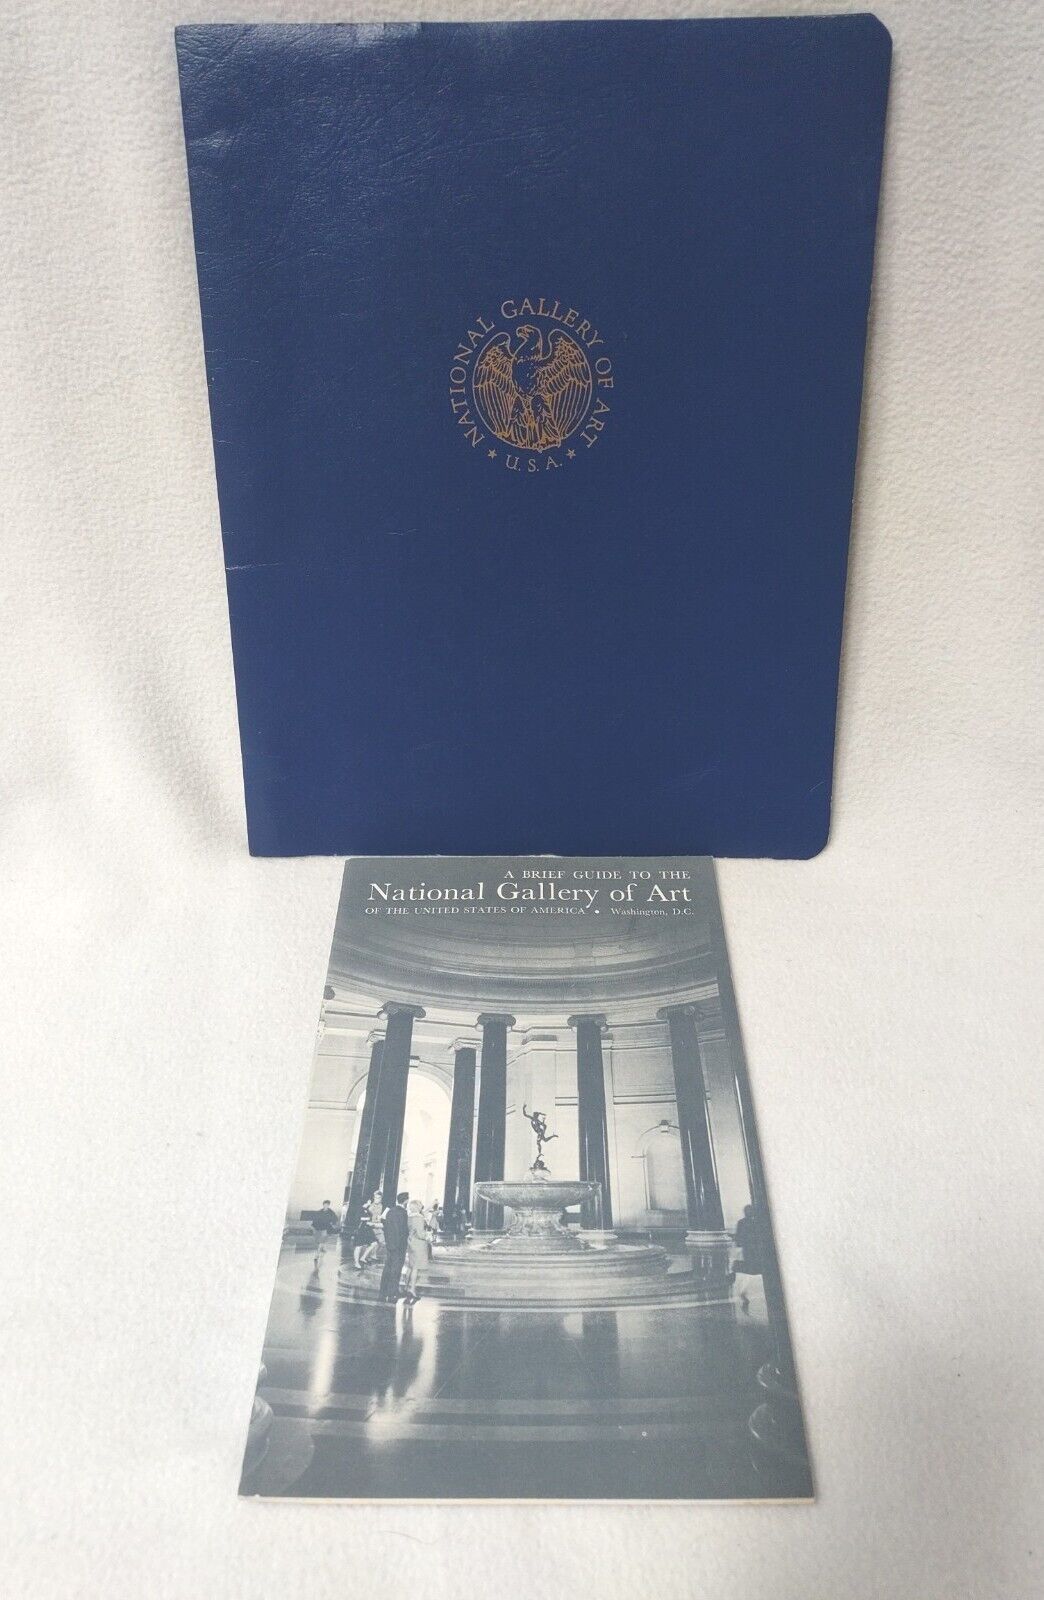 Vintage 1969 Brief Guide National Gallery of Art Washington D.C